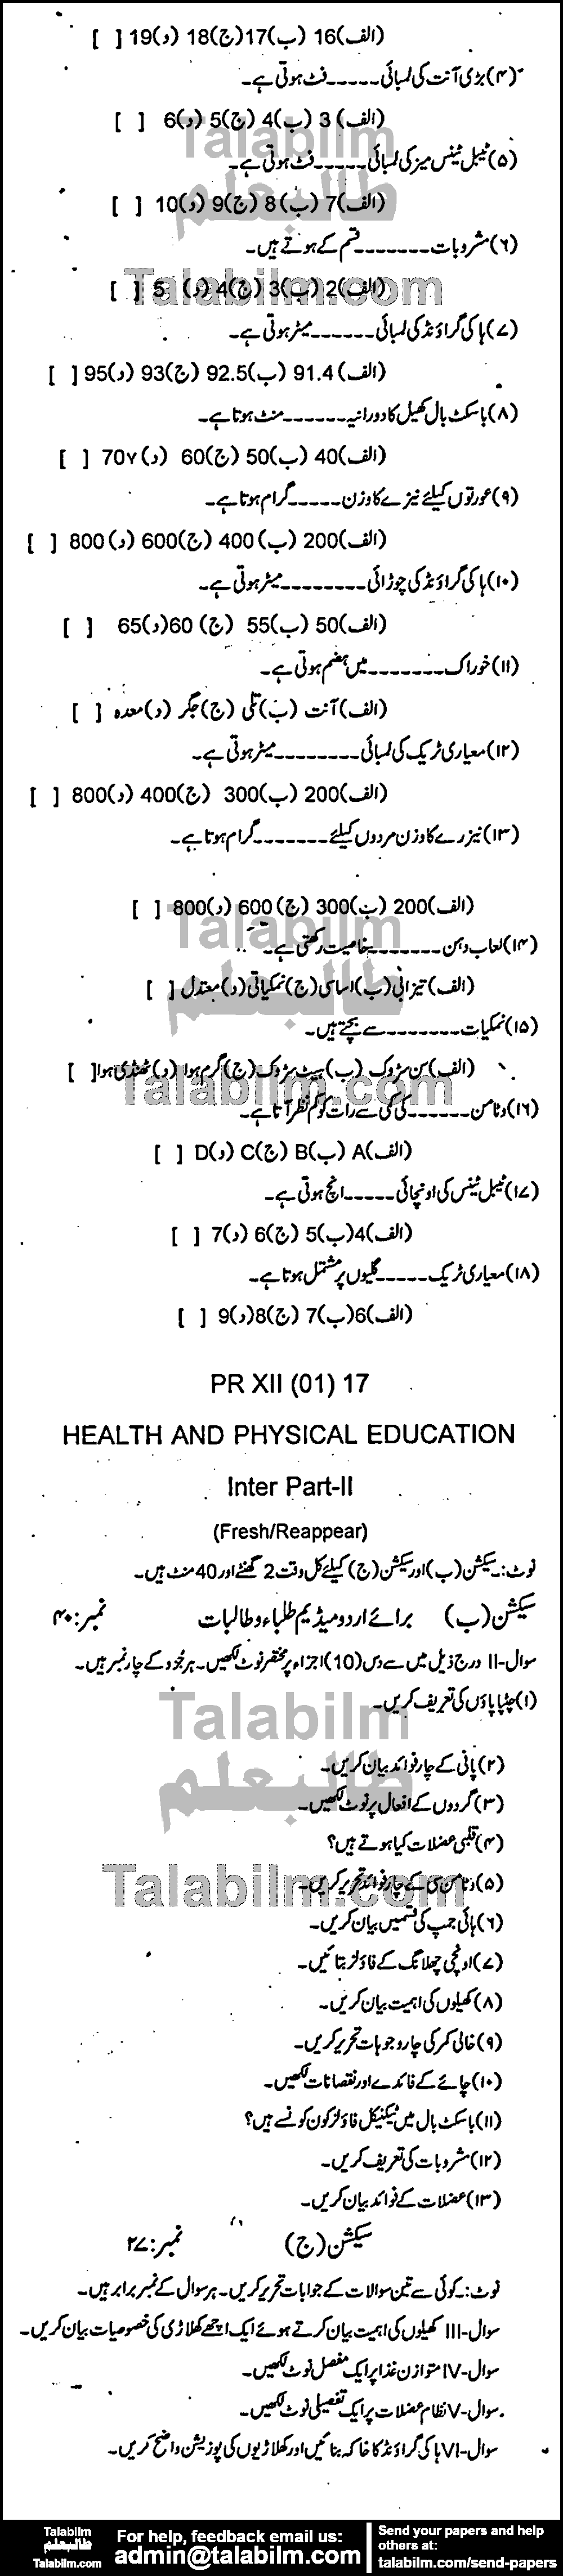 Health And Physical Education 0 past paper for Group-I 2017